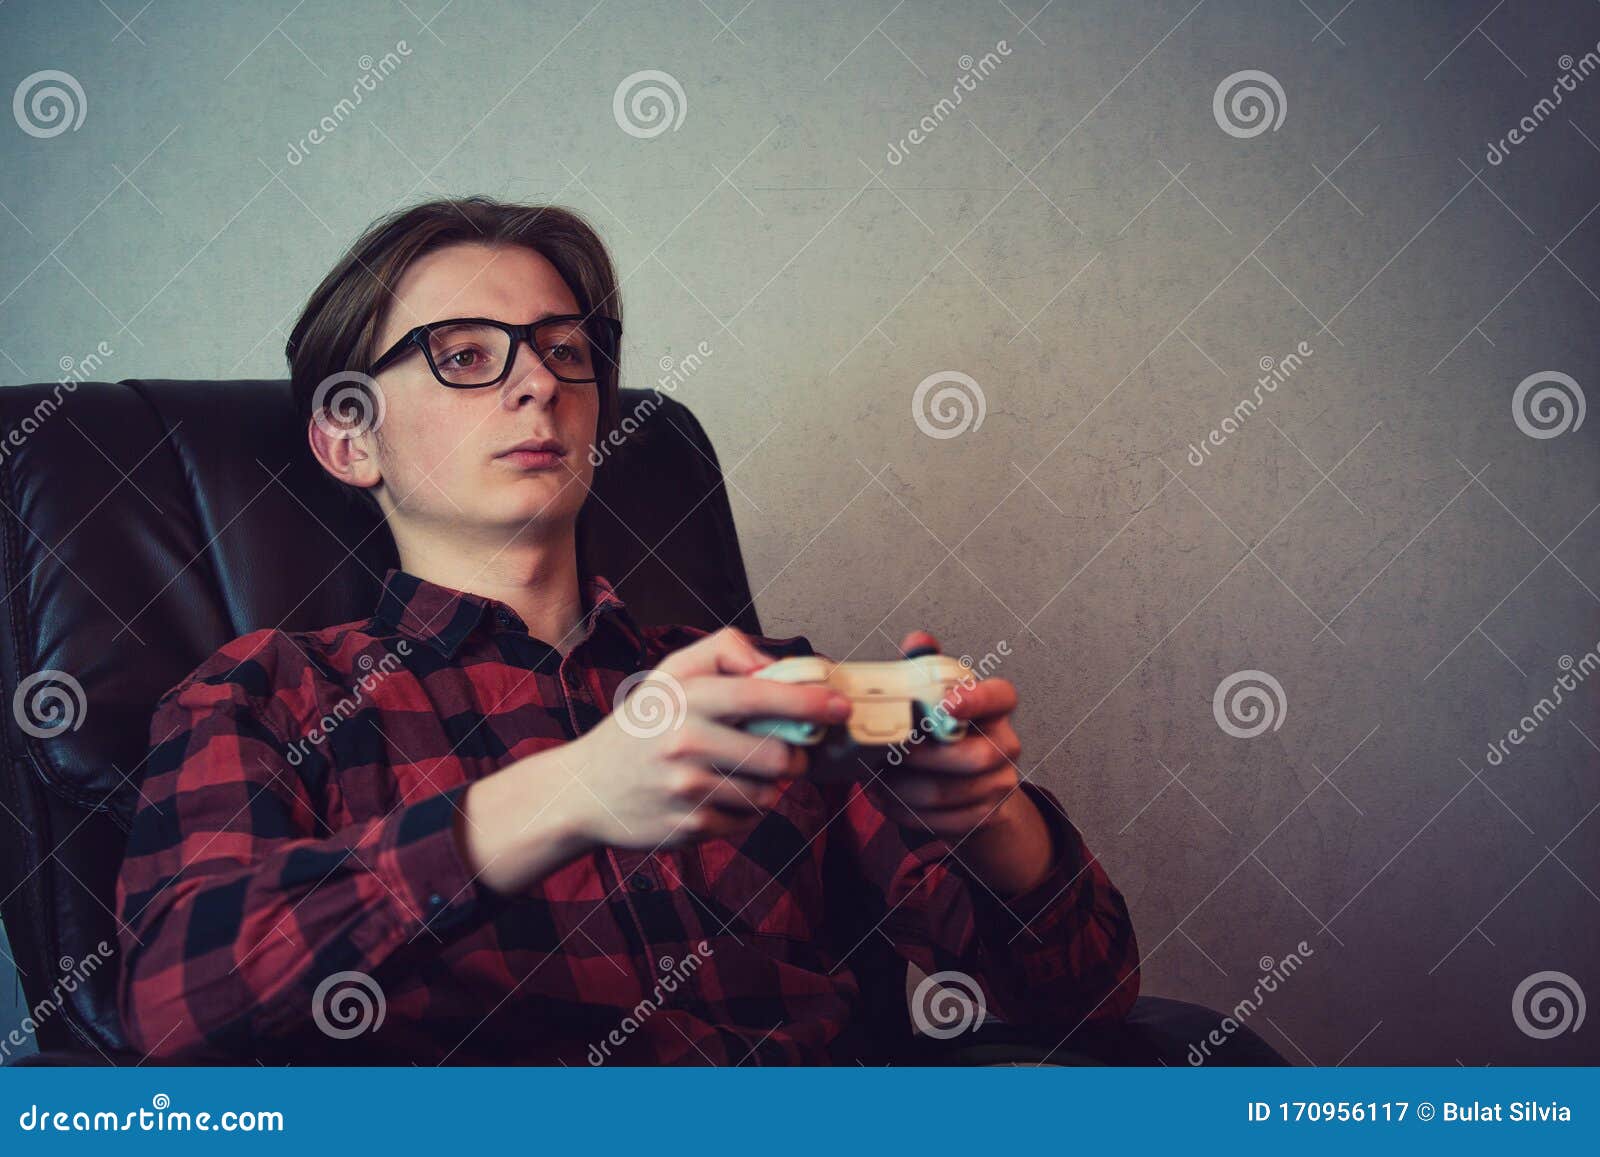 serious adolescent boy playing video games late night seated relaxed in his armchair over grey wall background. intent teen guy